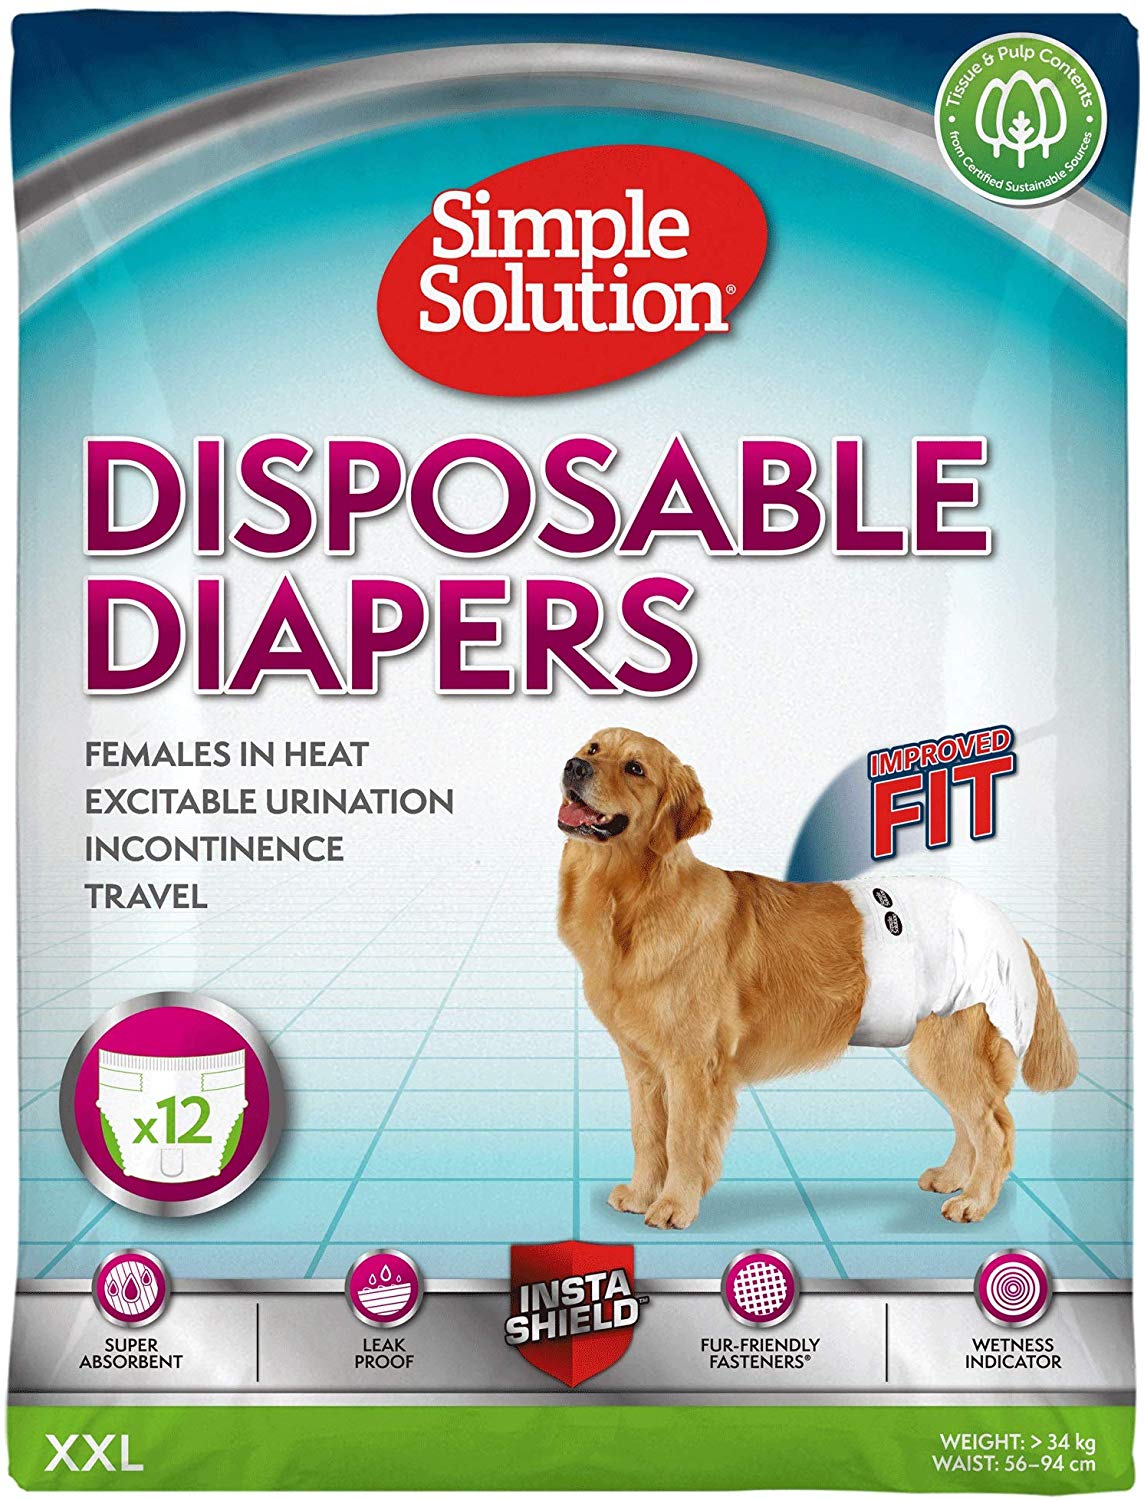 Simple Solution Disposable Dog Diapers, XLarge, Pack of 12